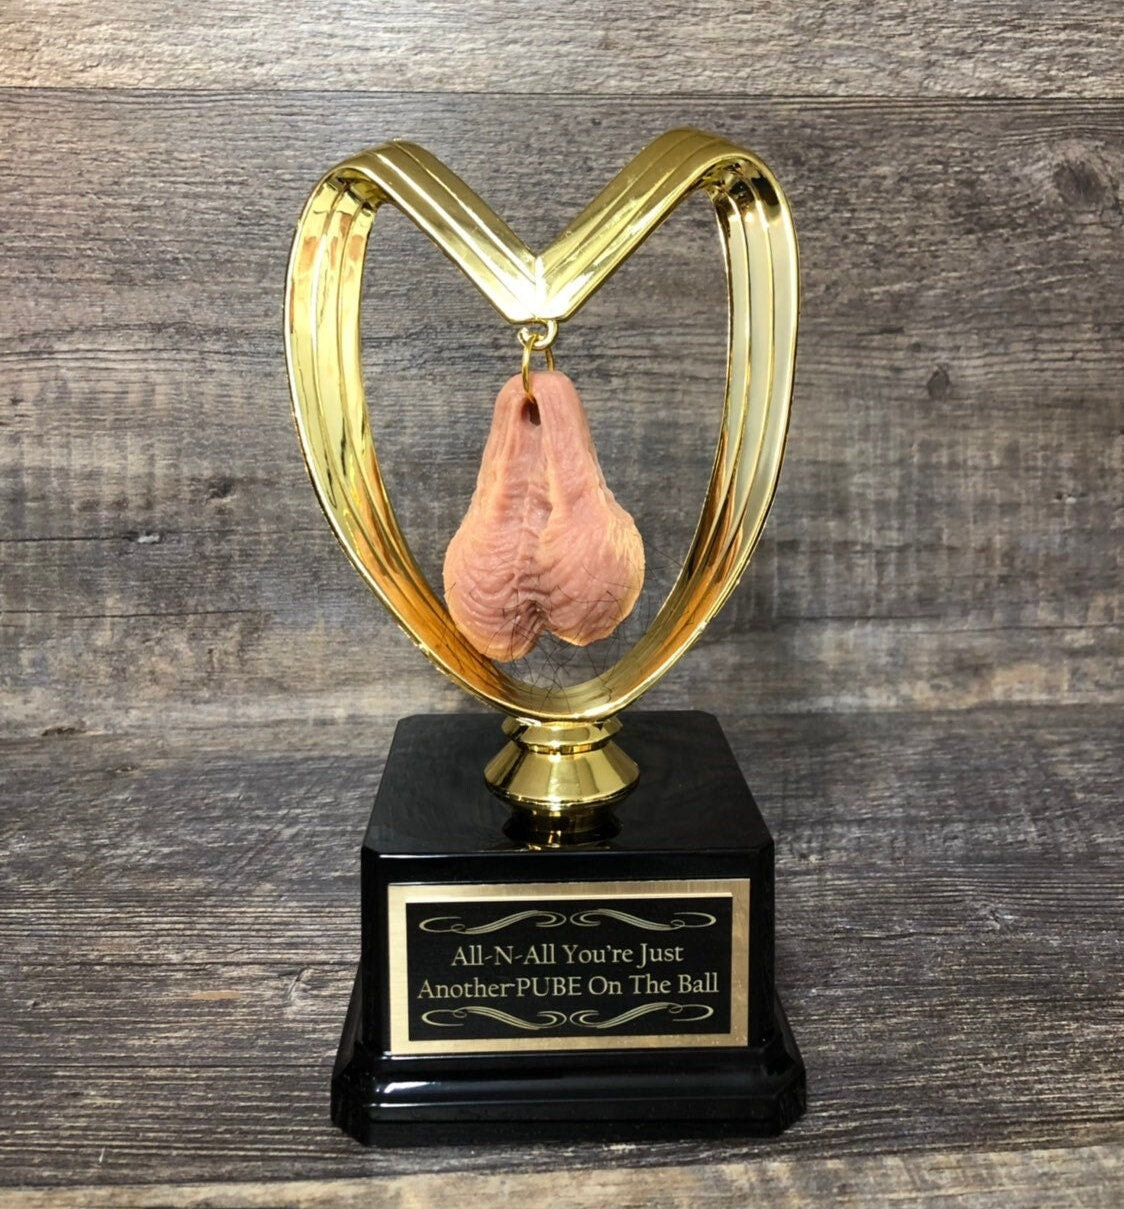 HAIRY Balls All N' All You're Just Another Pube On The Ball Funny Trophy You Suck Loser Trophy FFL Sacko Adult Humor Gag Gift Testicle